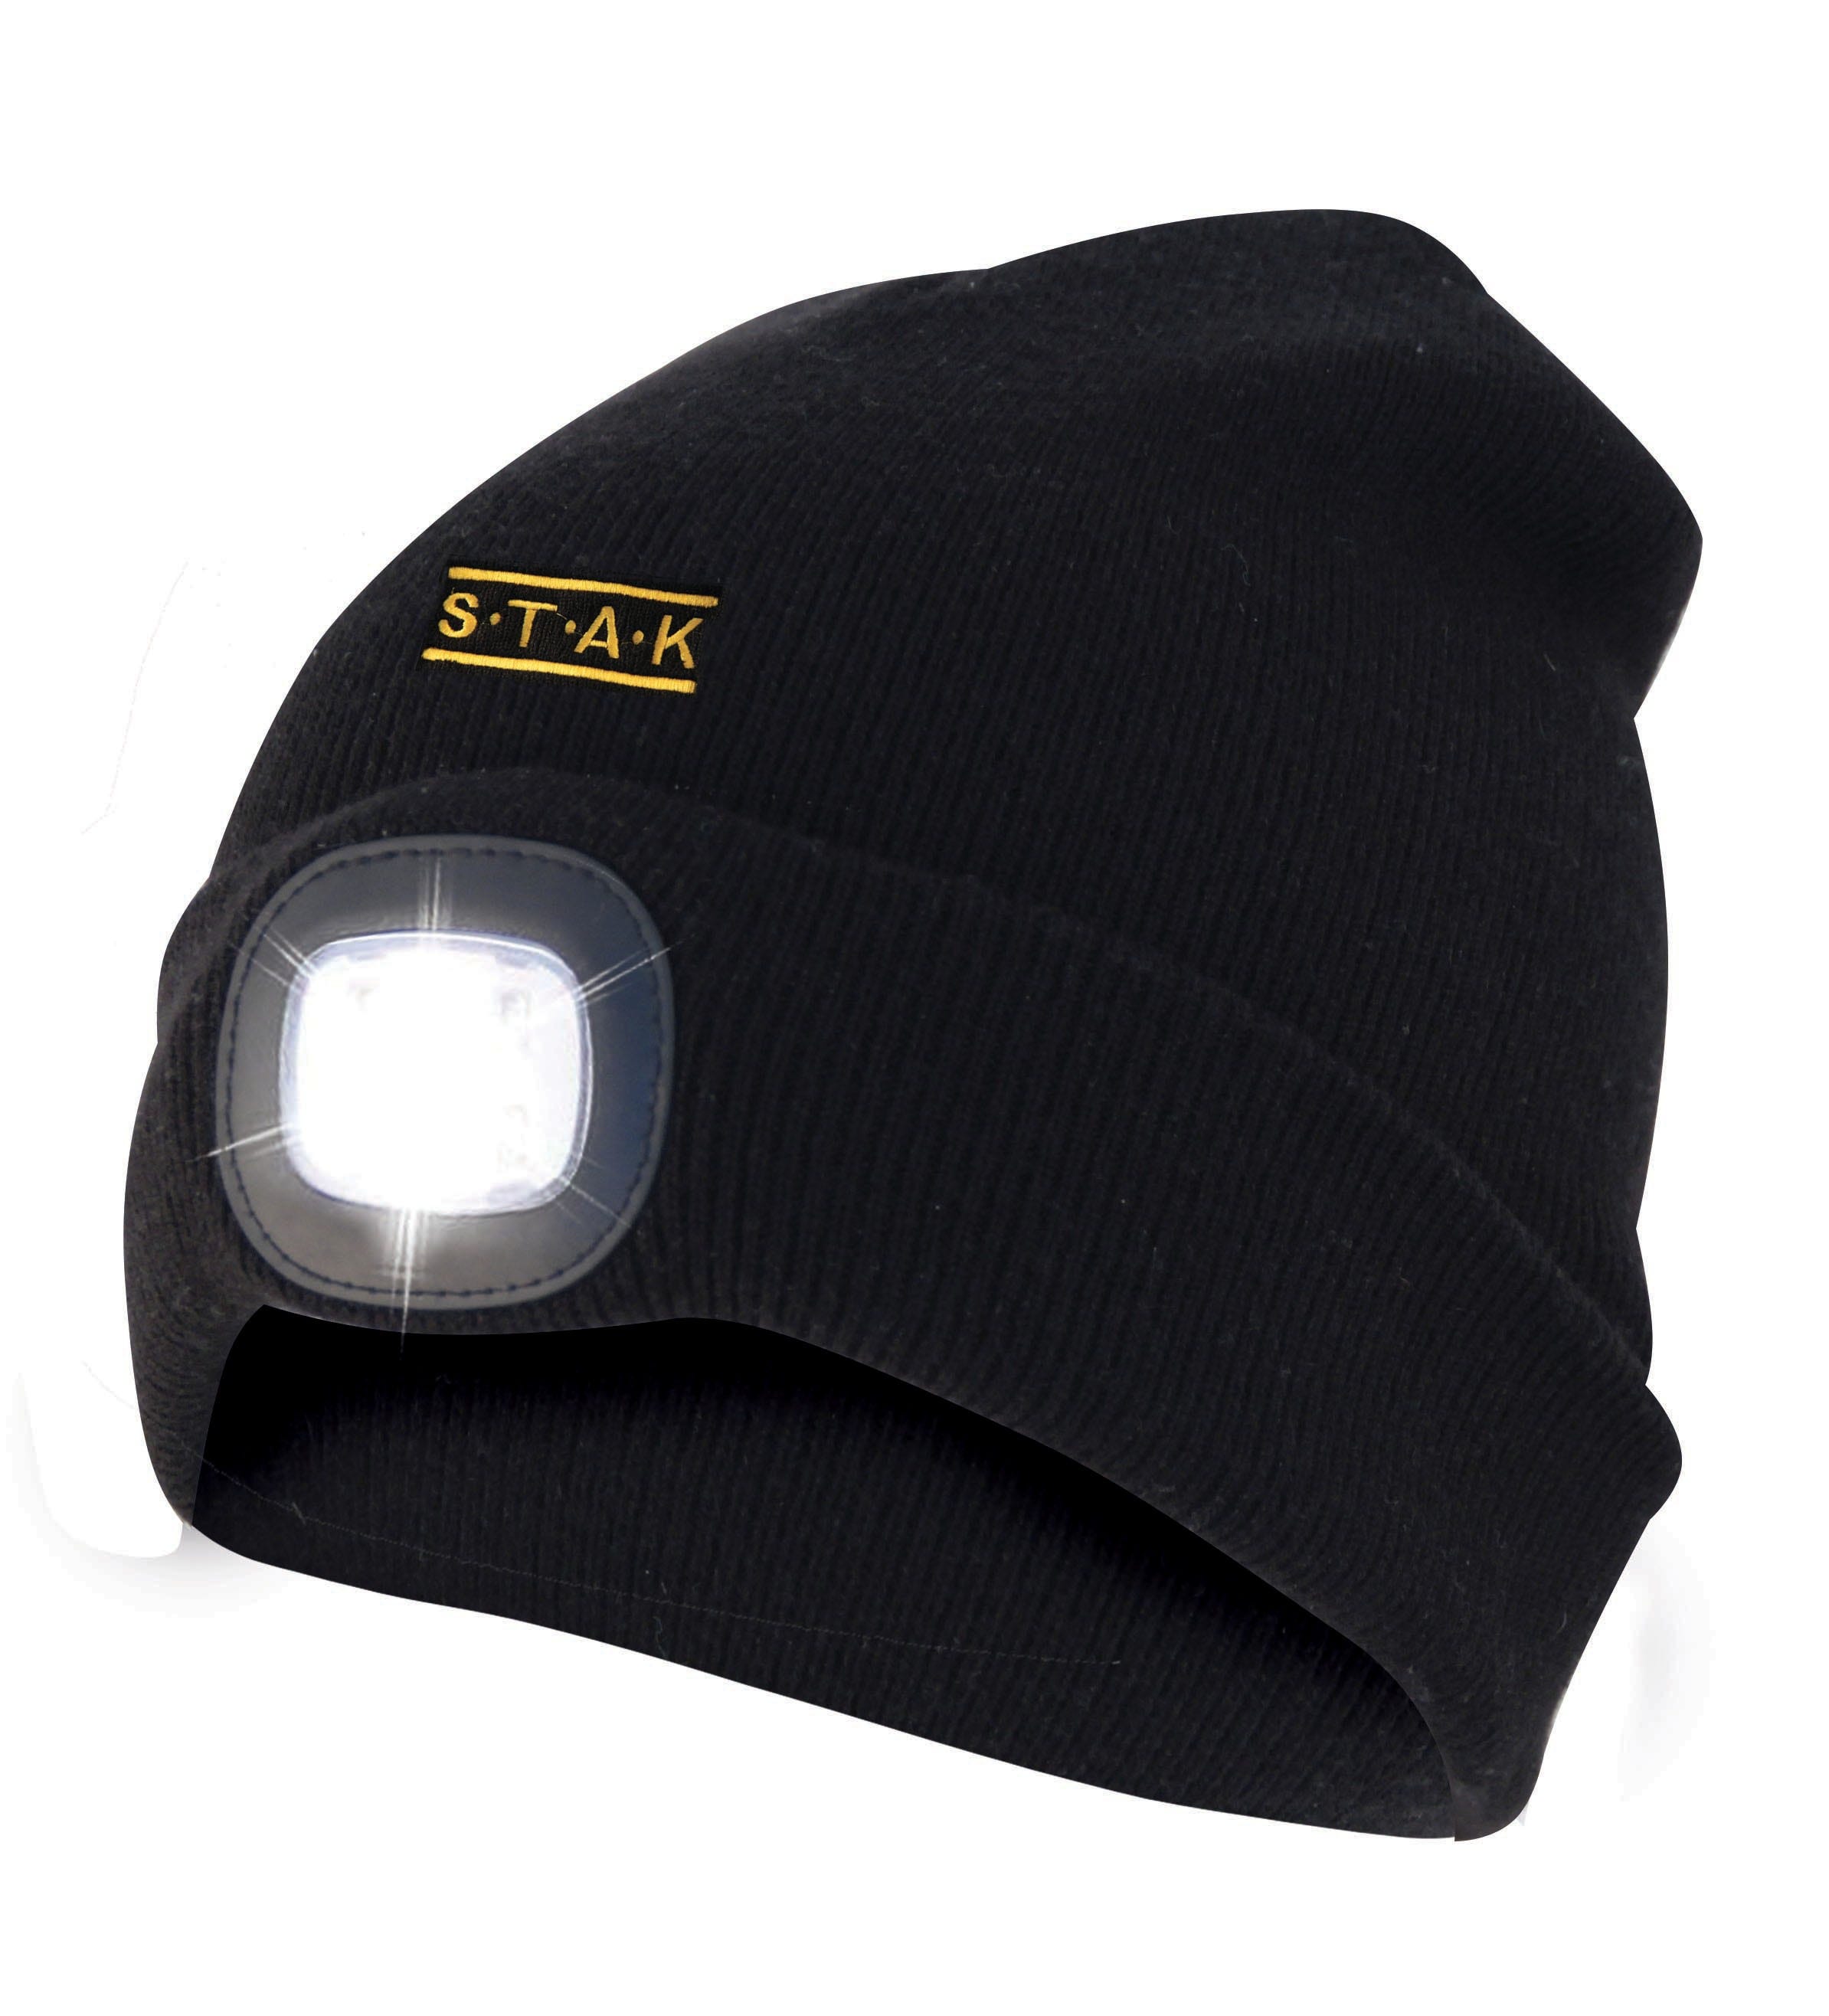 Cappellino con luce frontale torcia led ricaricabile + luce rossa